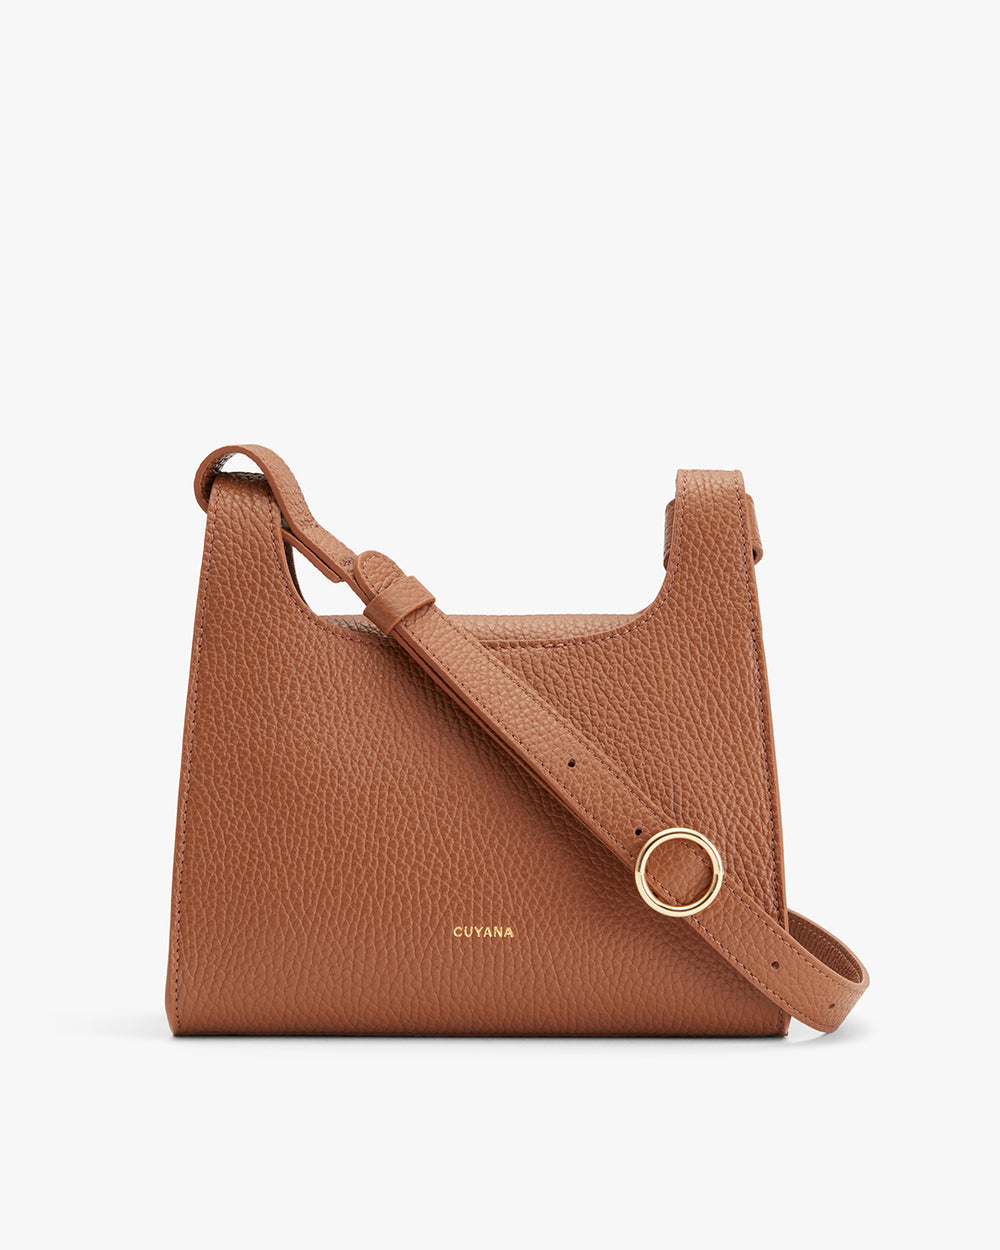 Handbag with shoulder strap and ring detail on front